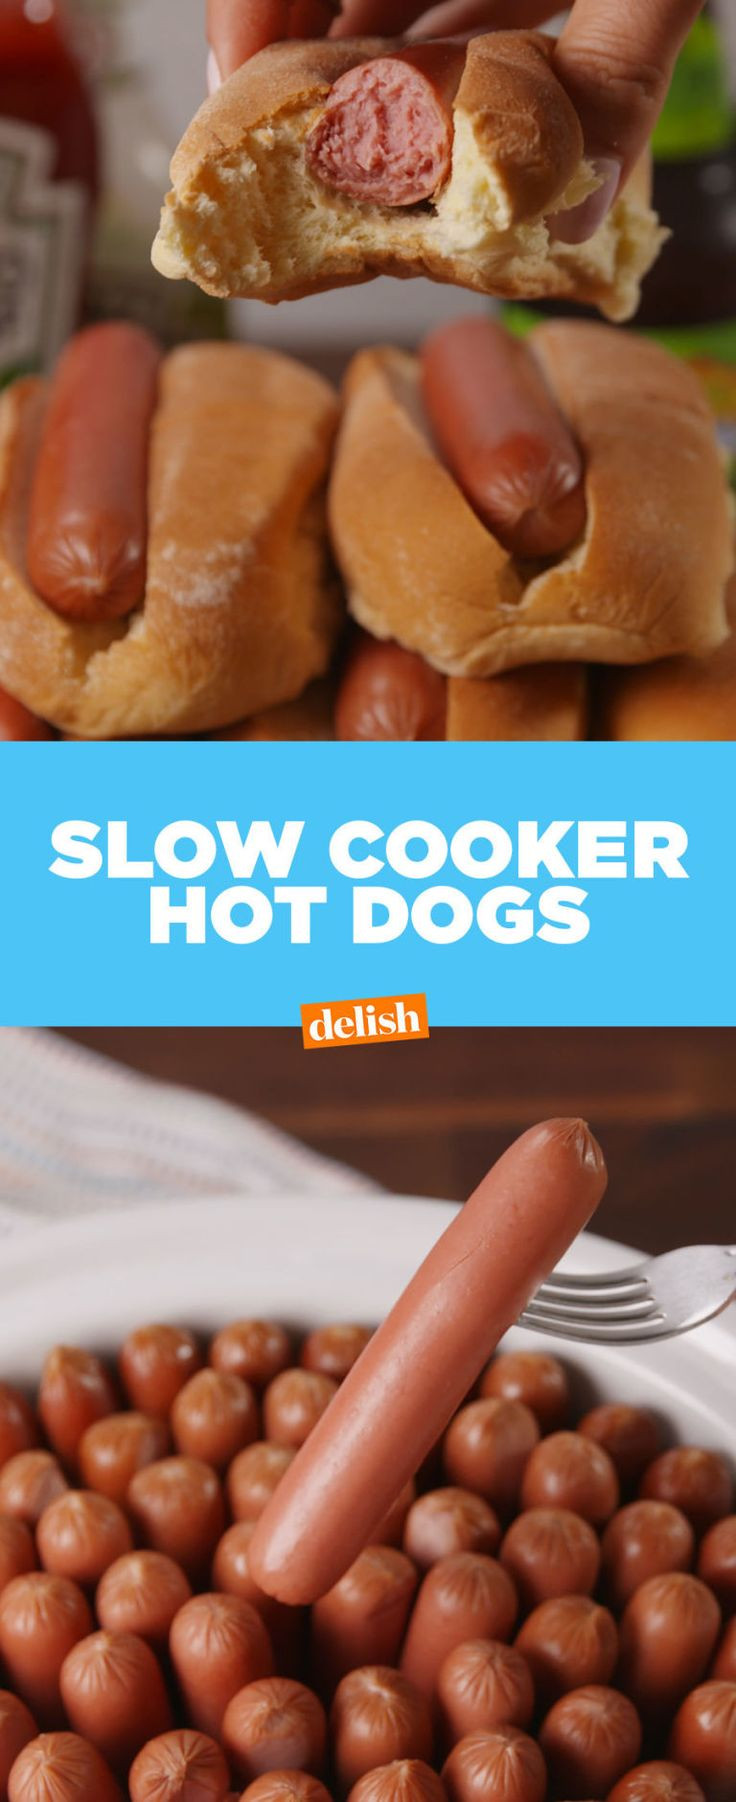 Slow Cooker Hot Dogs
 490 best Hot Dogs images on Pinterest